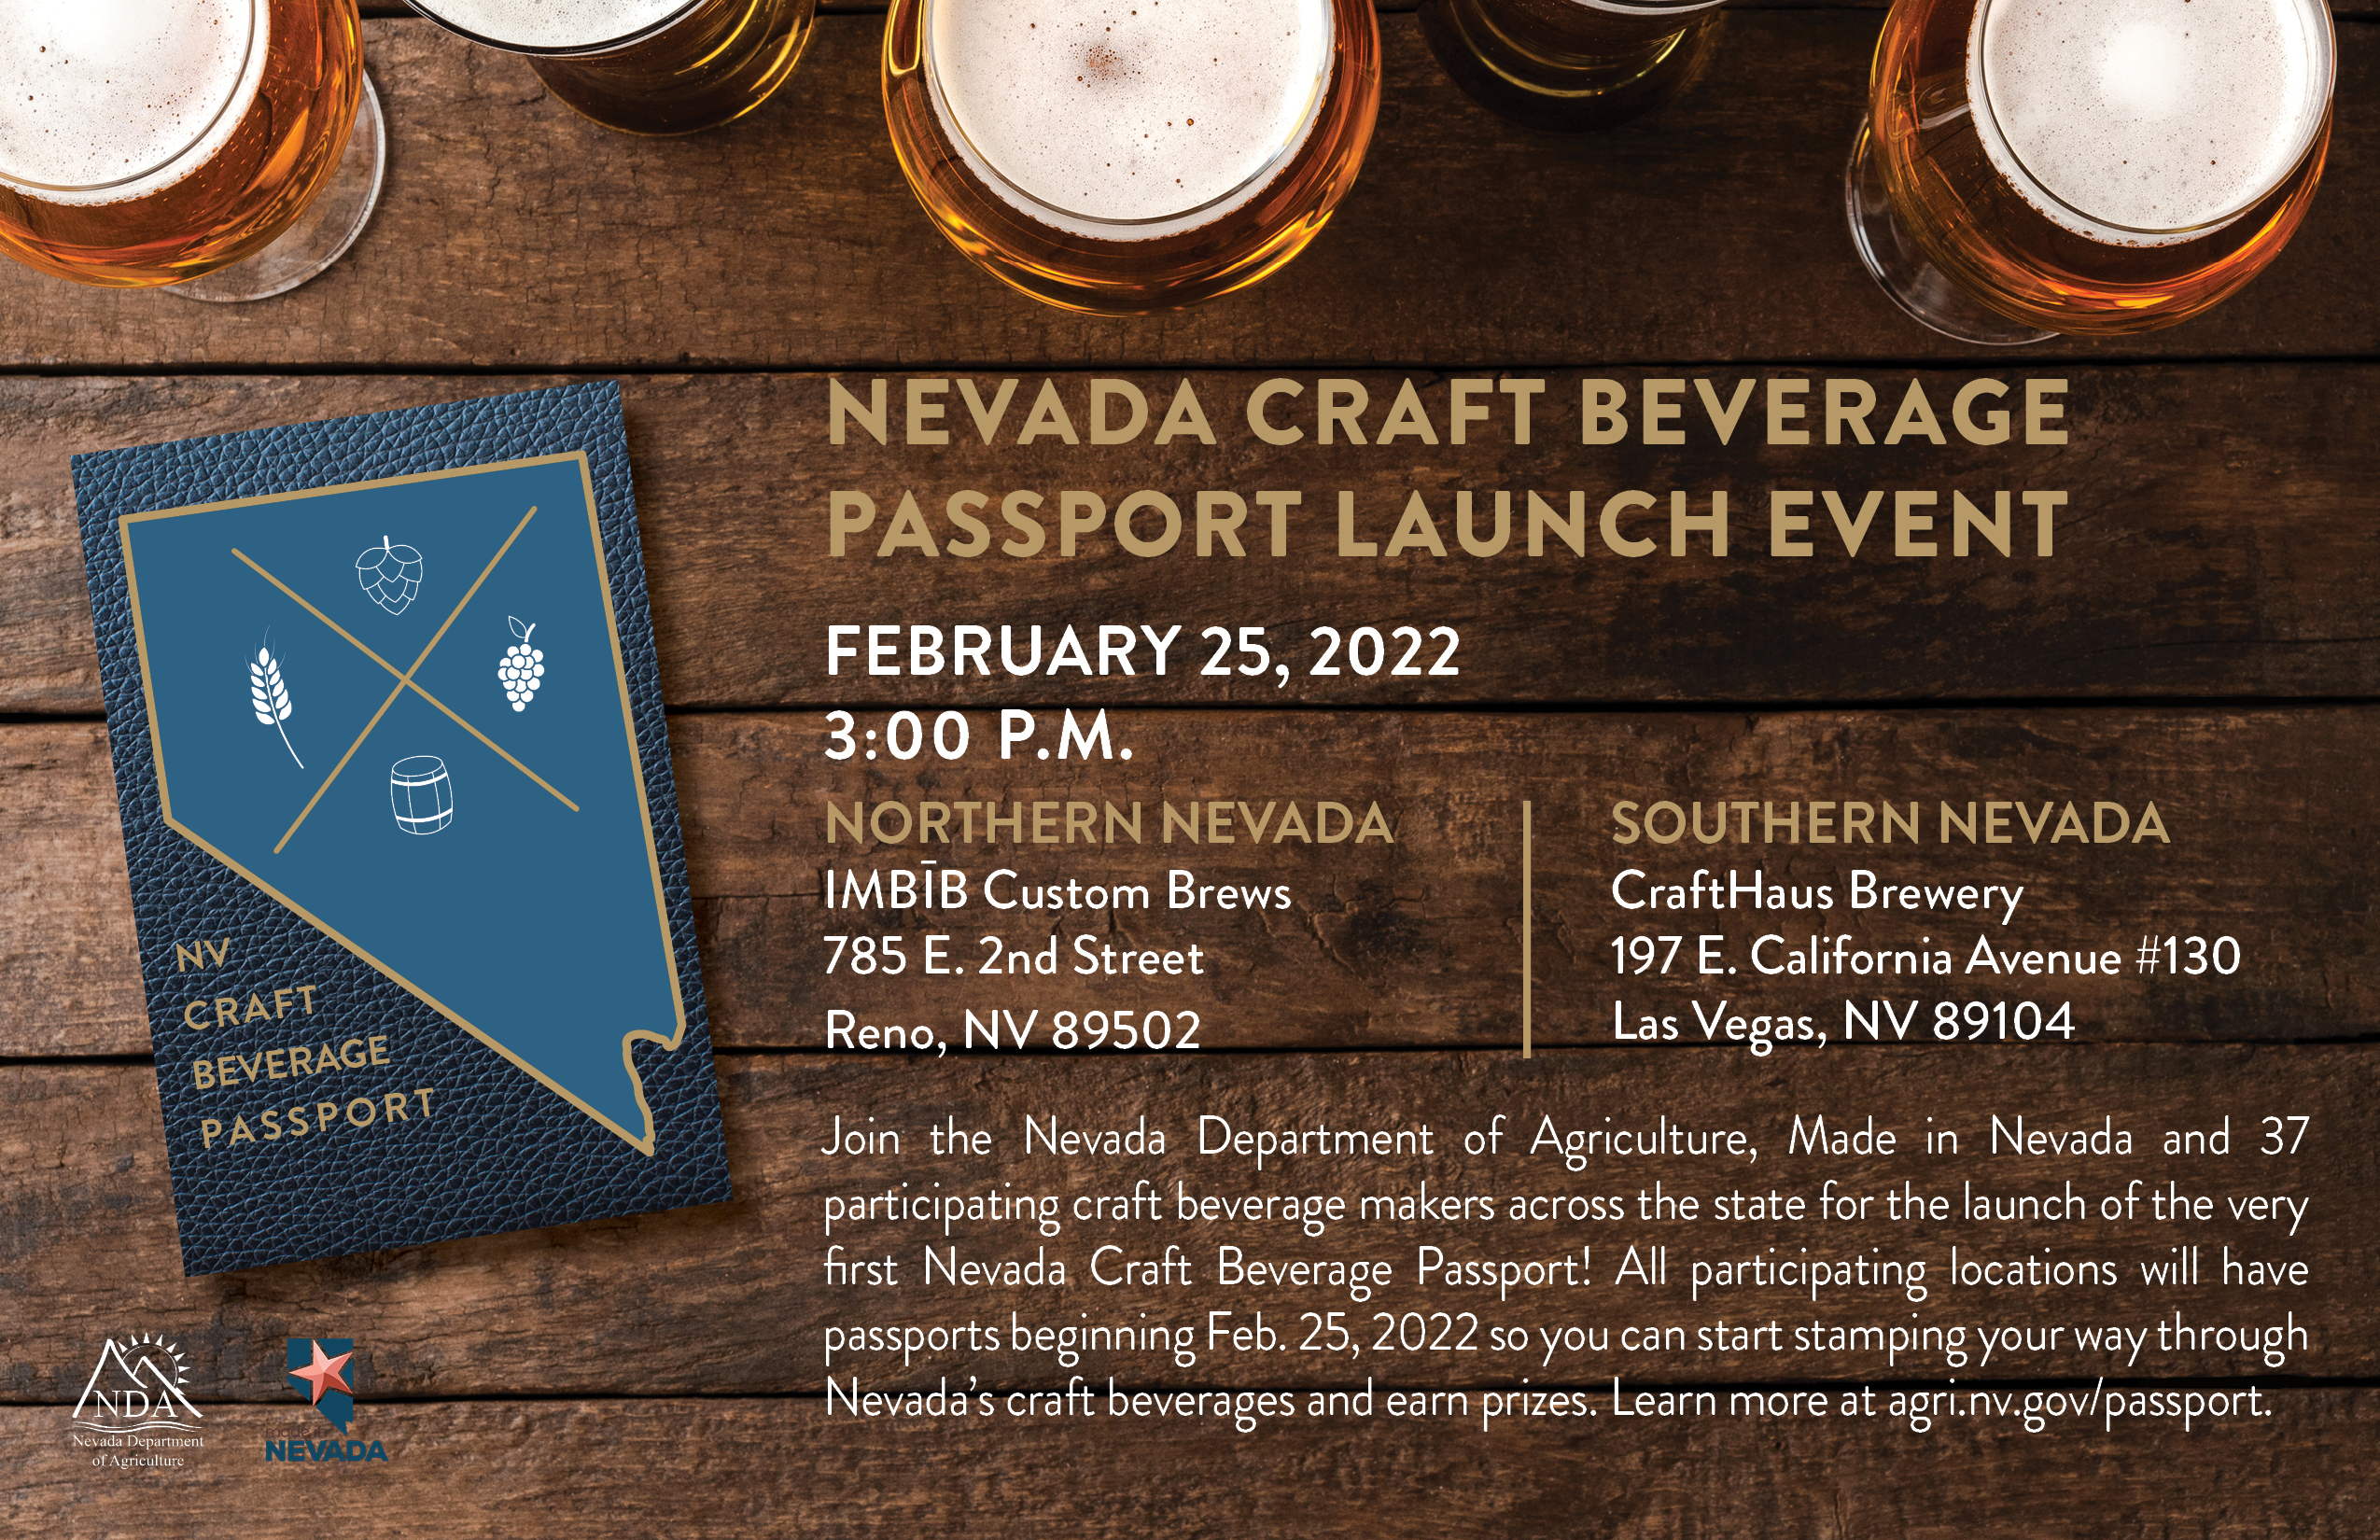 Invitation for the Nevada Craft Beverage Launch Event that took place on Feb. 25. Details included in the release.